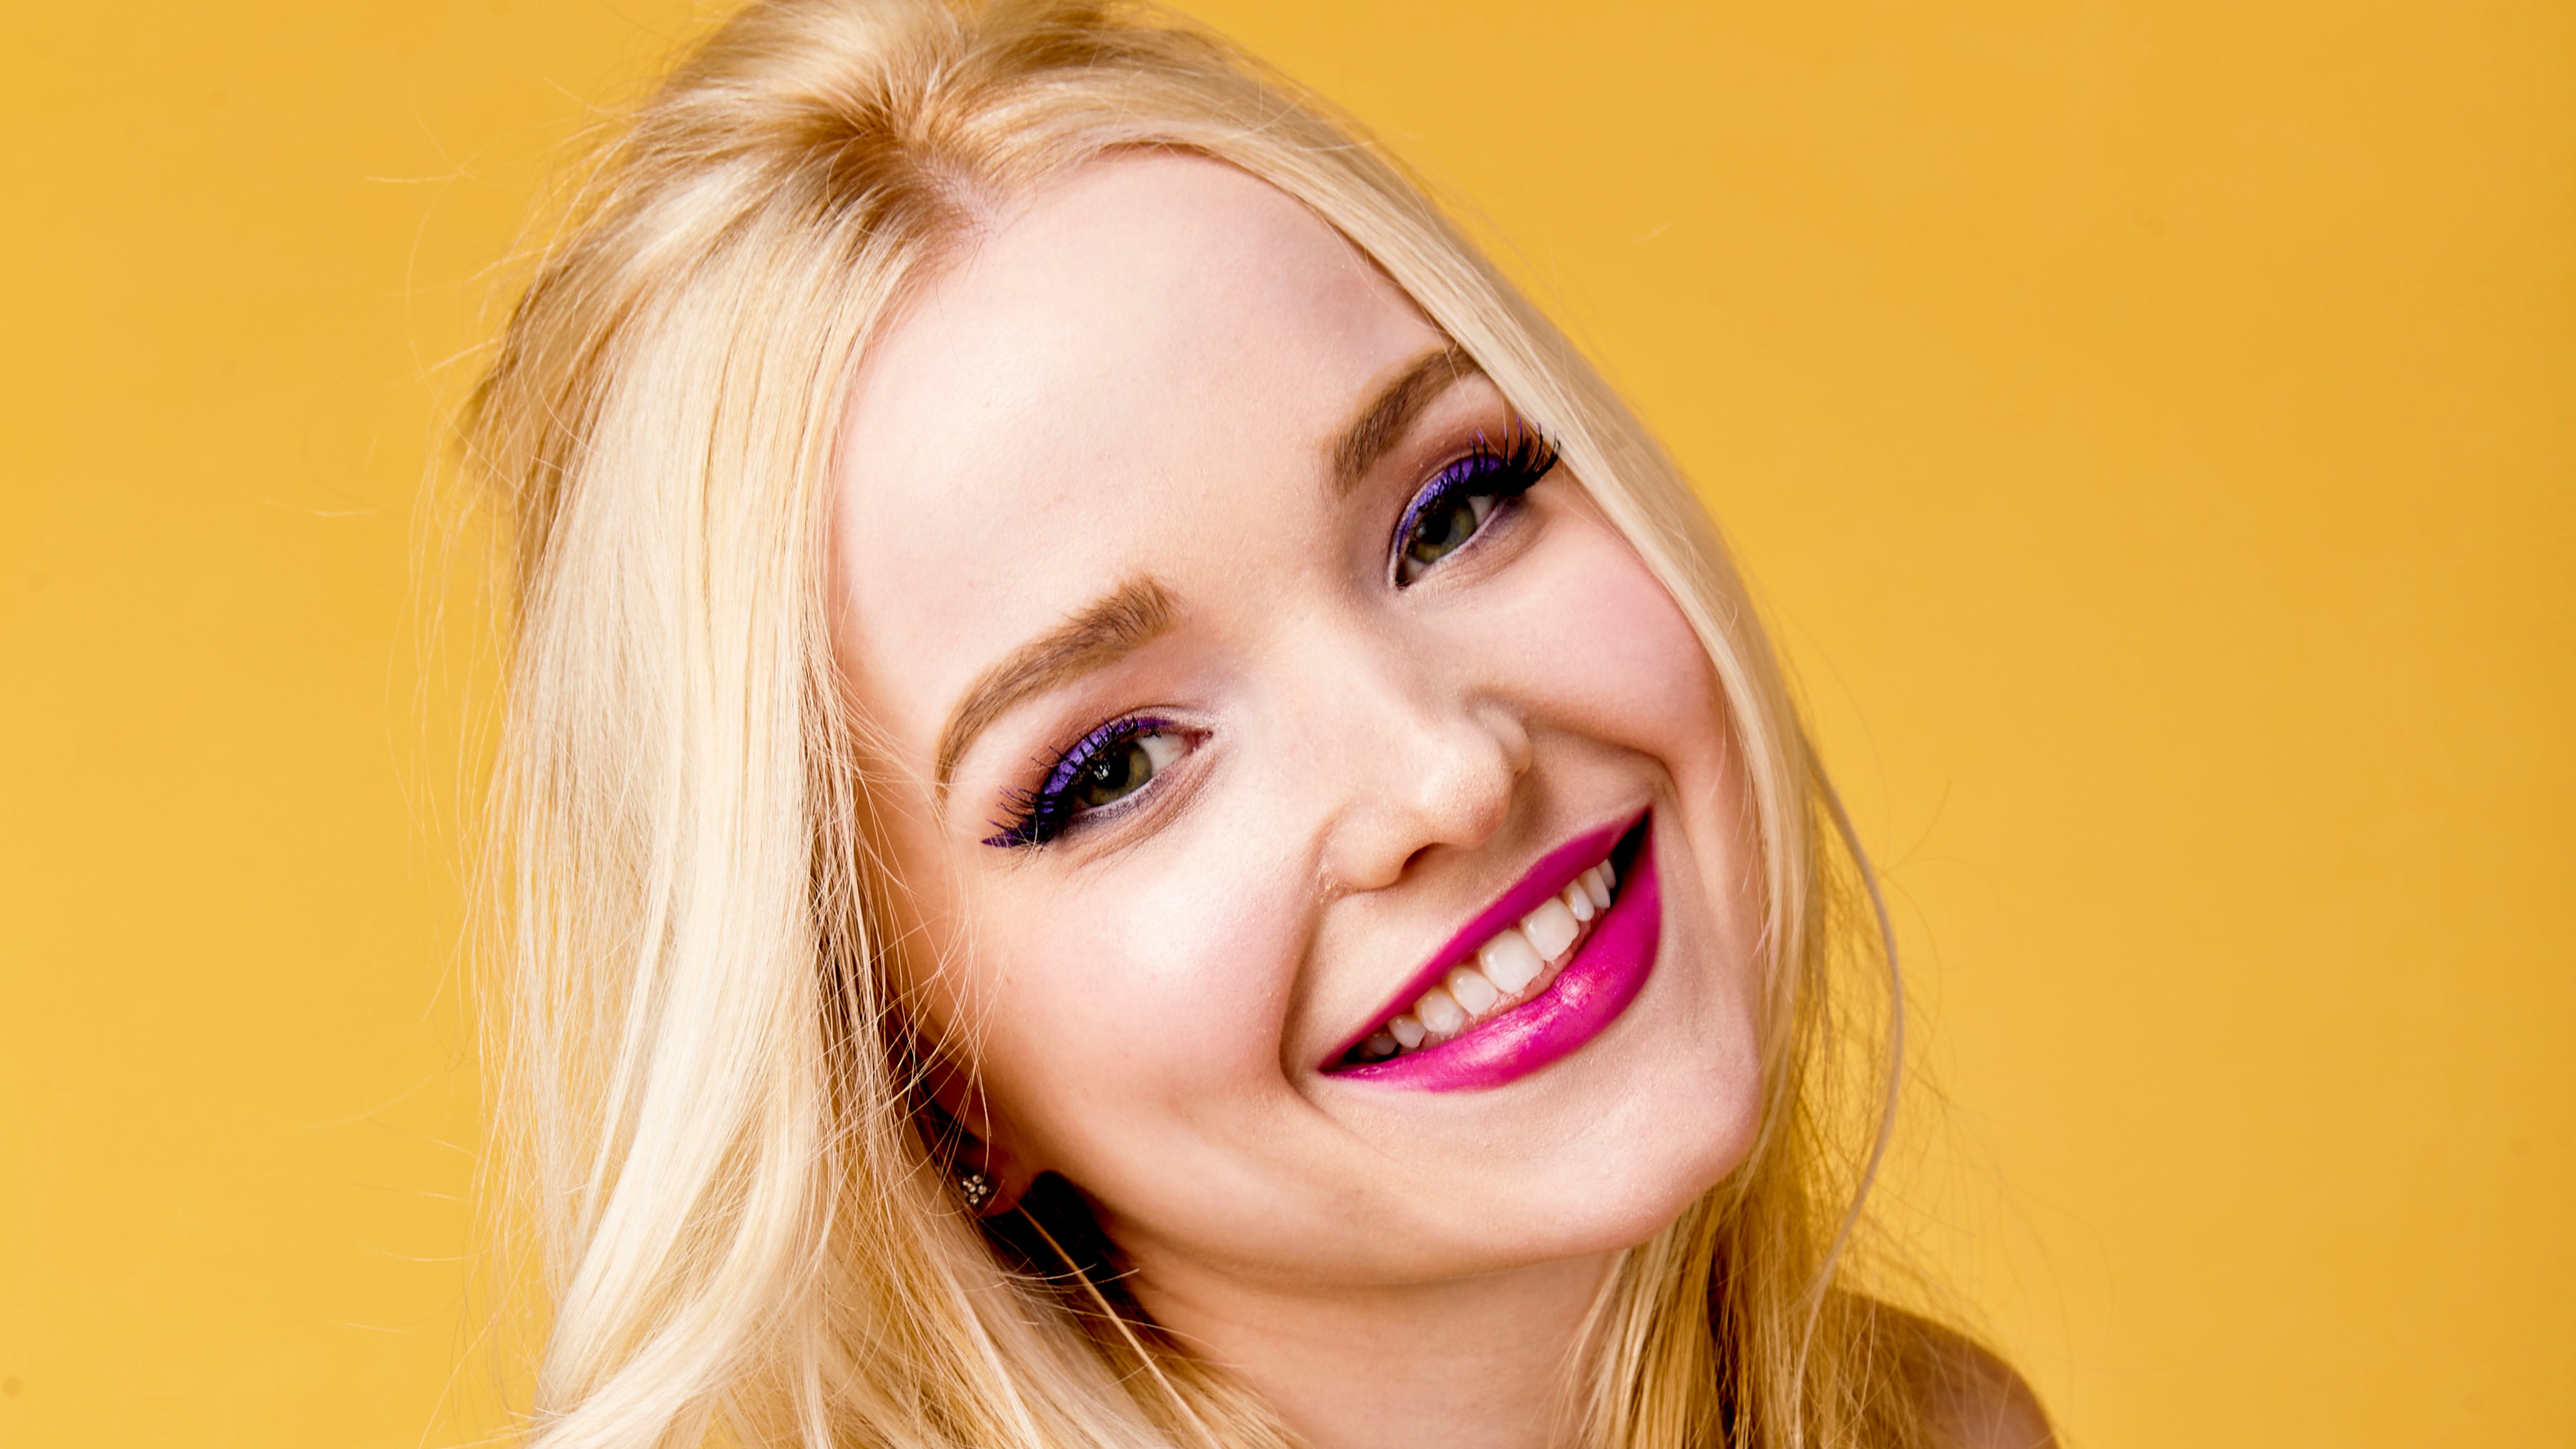 Dove Cameron for TIGER BEAT Magazine, Summer 2016 by Brian Lowe